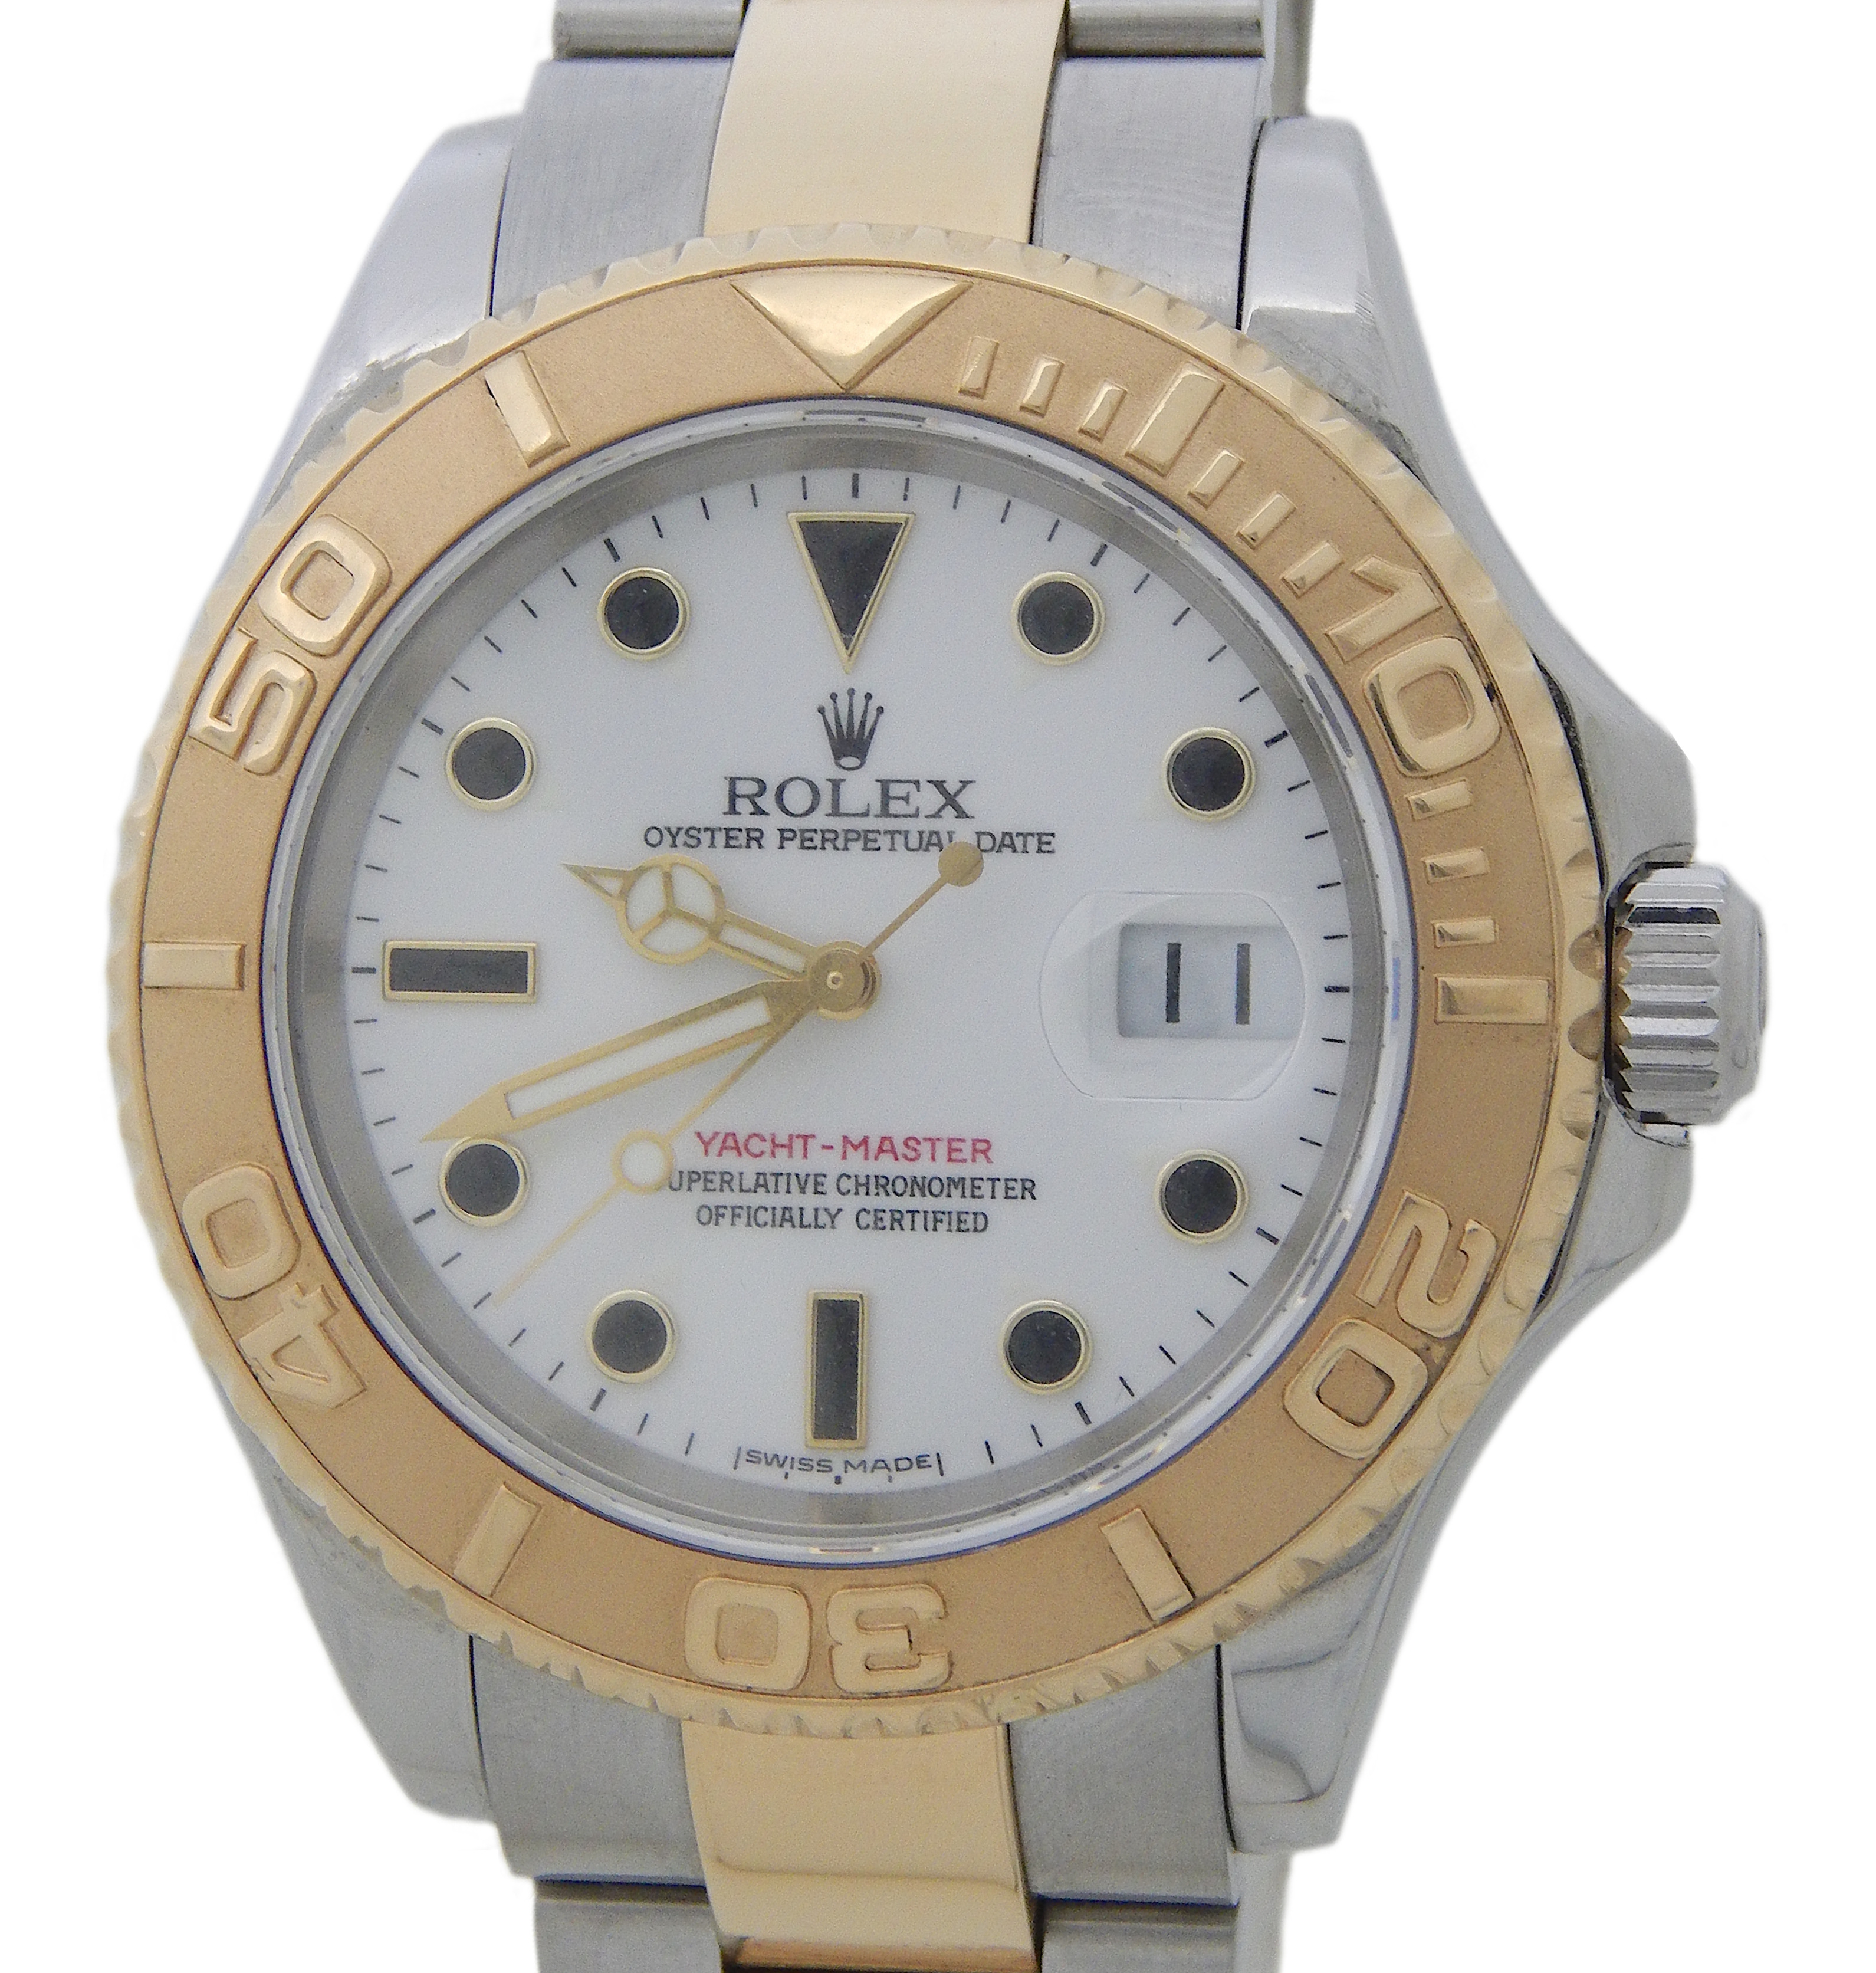 Pre-Owned Rolex Yacht-Master 16623 Watch